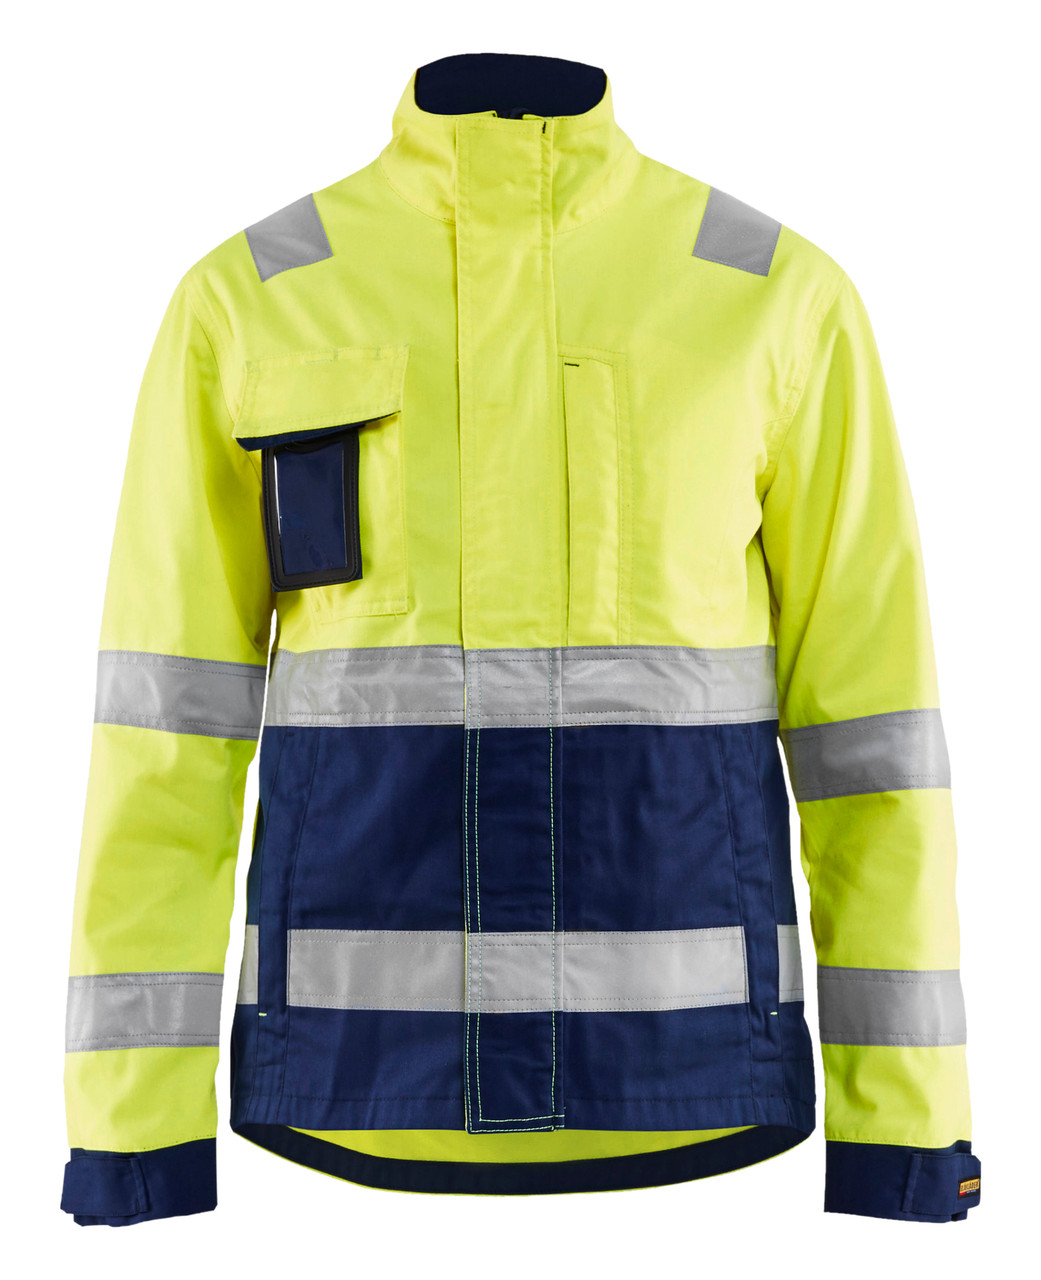 BLAKLADER Jacket | 4903 Womens High Vis Yellow /Navy Blue Jacket with Full Zip Reflective Tape in Polyester